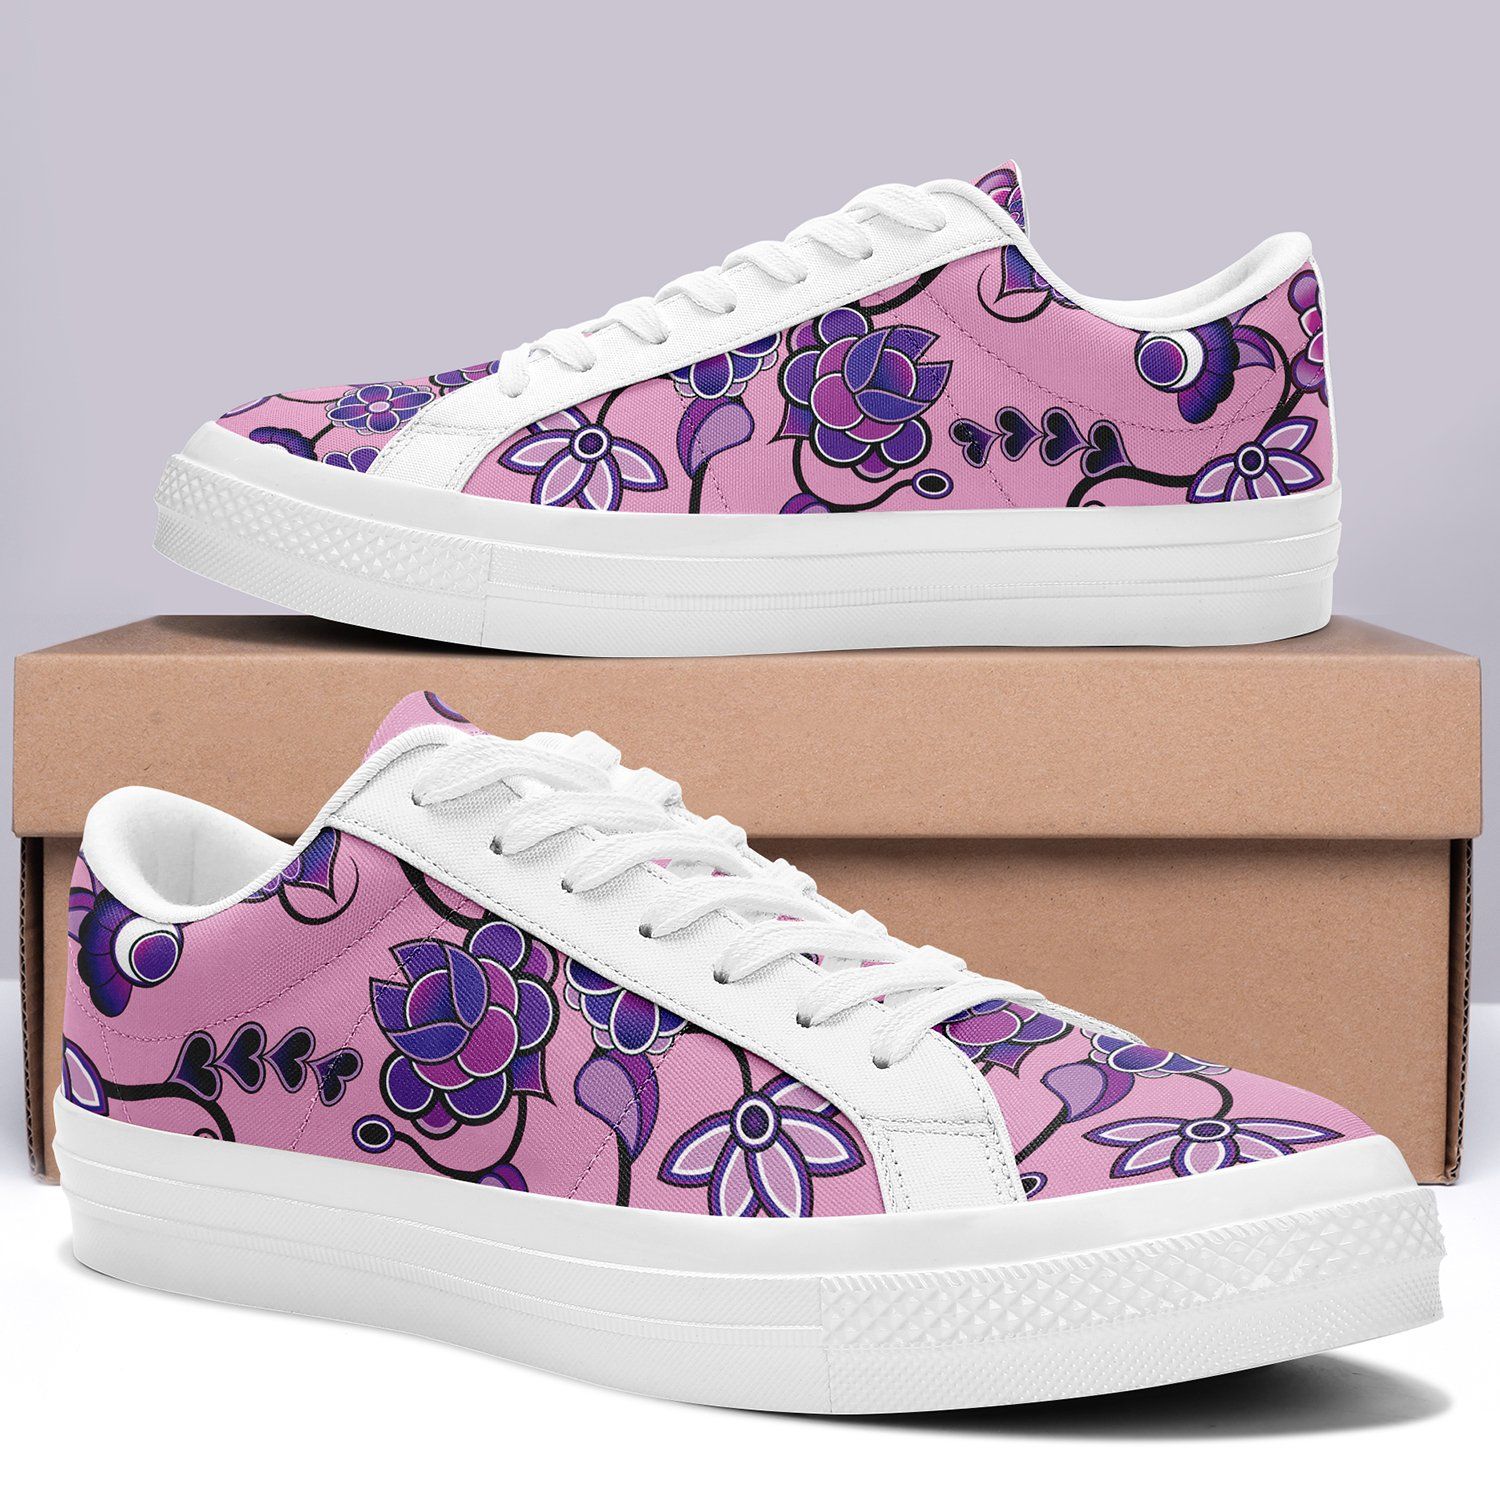 Purple Floral Amour Aapisi Low Top Canvas Shoes White Sole aapisi Herman 